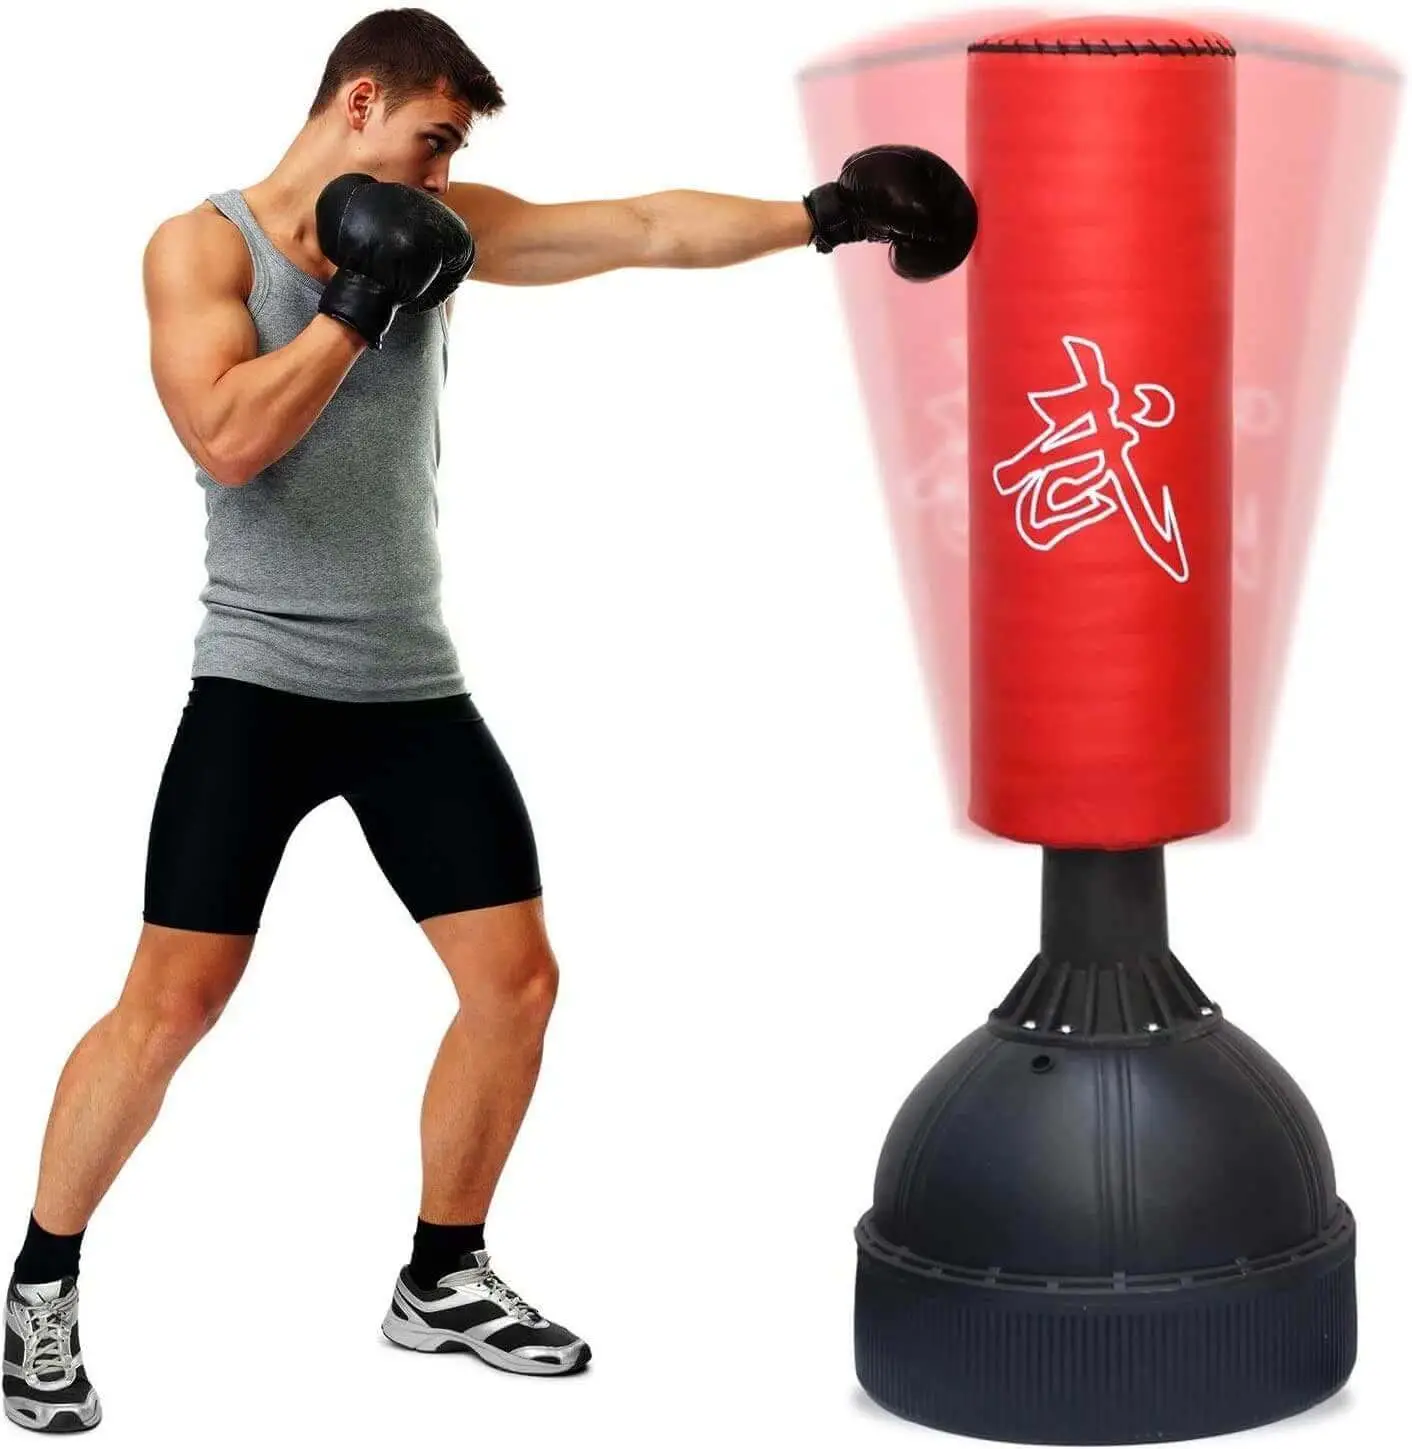 Freestanding Punch Bag Stand Punch Boxing Bag Set 5 feet 6 inch